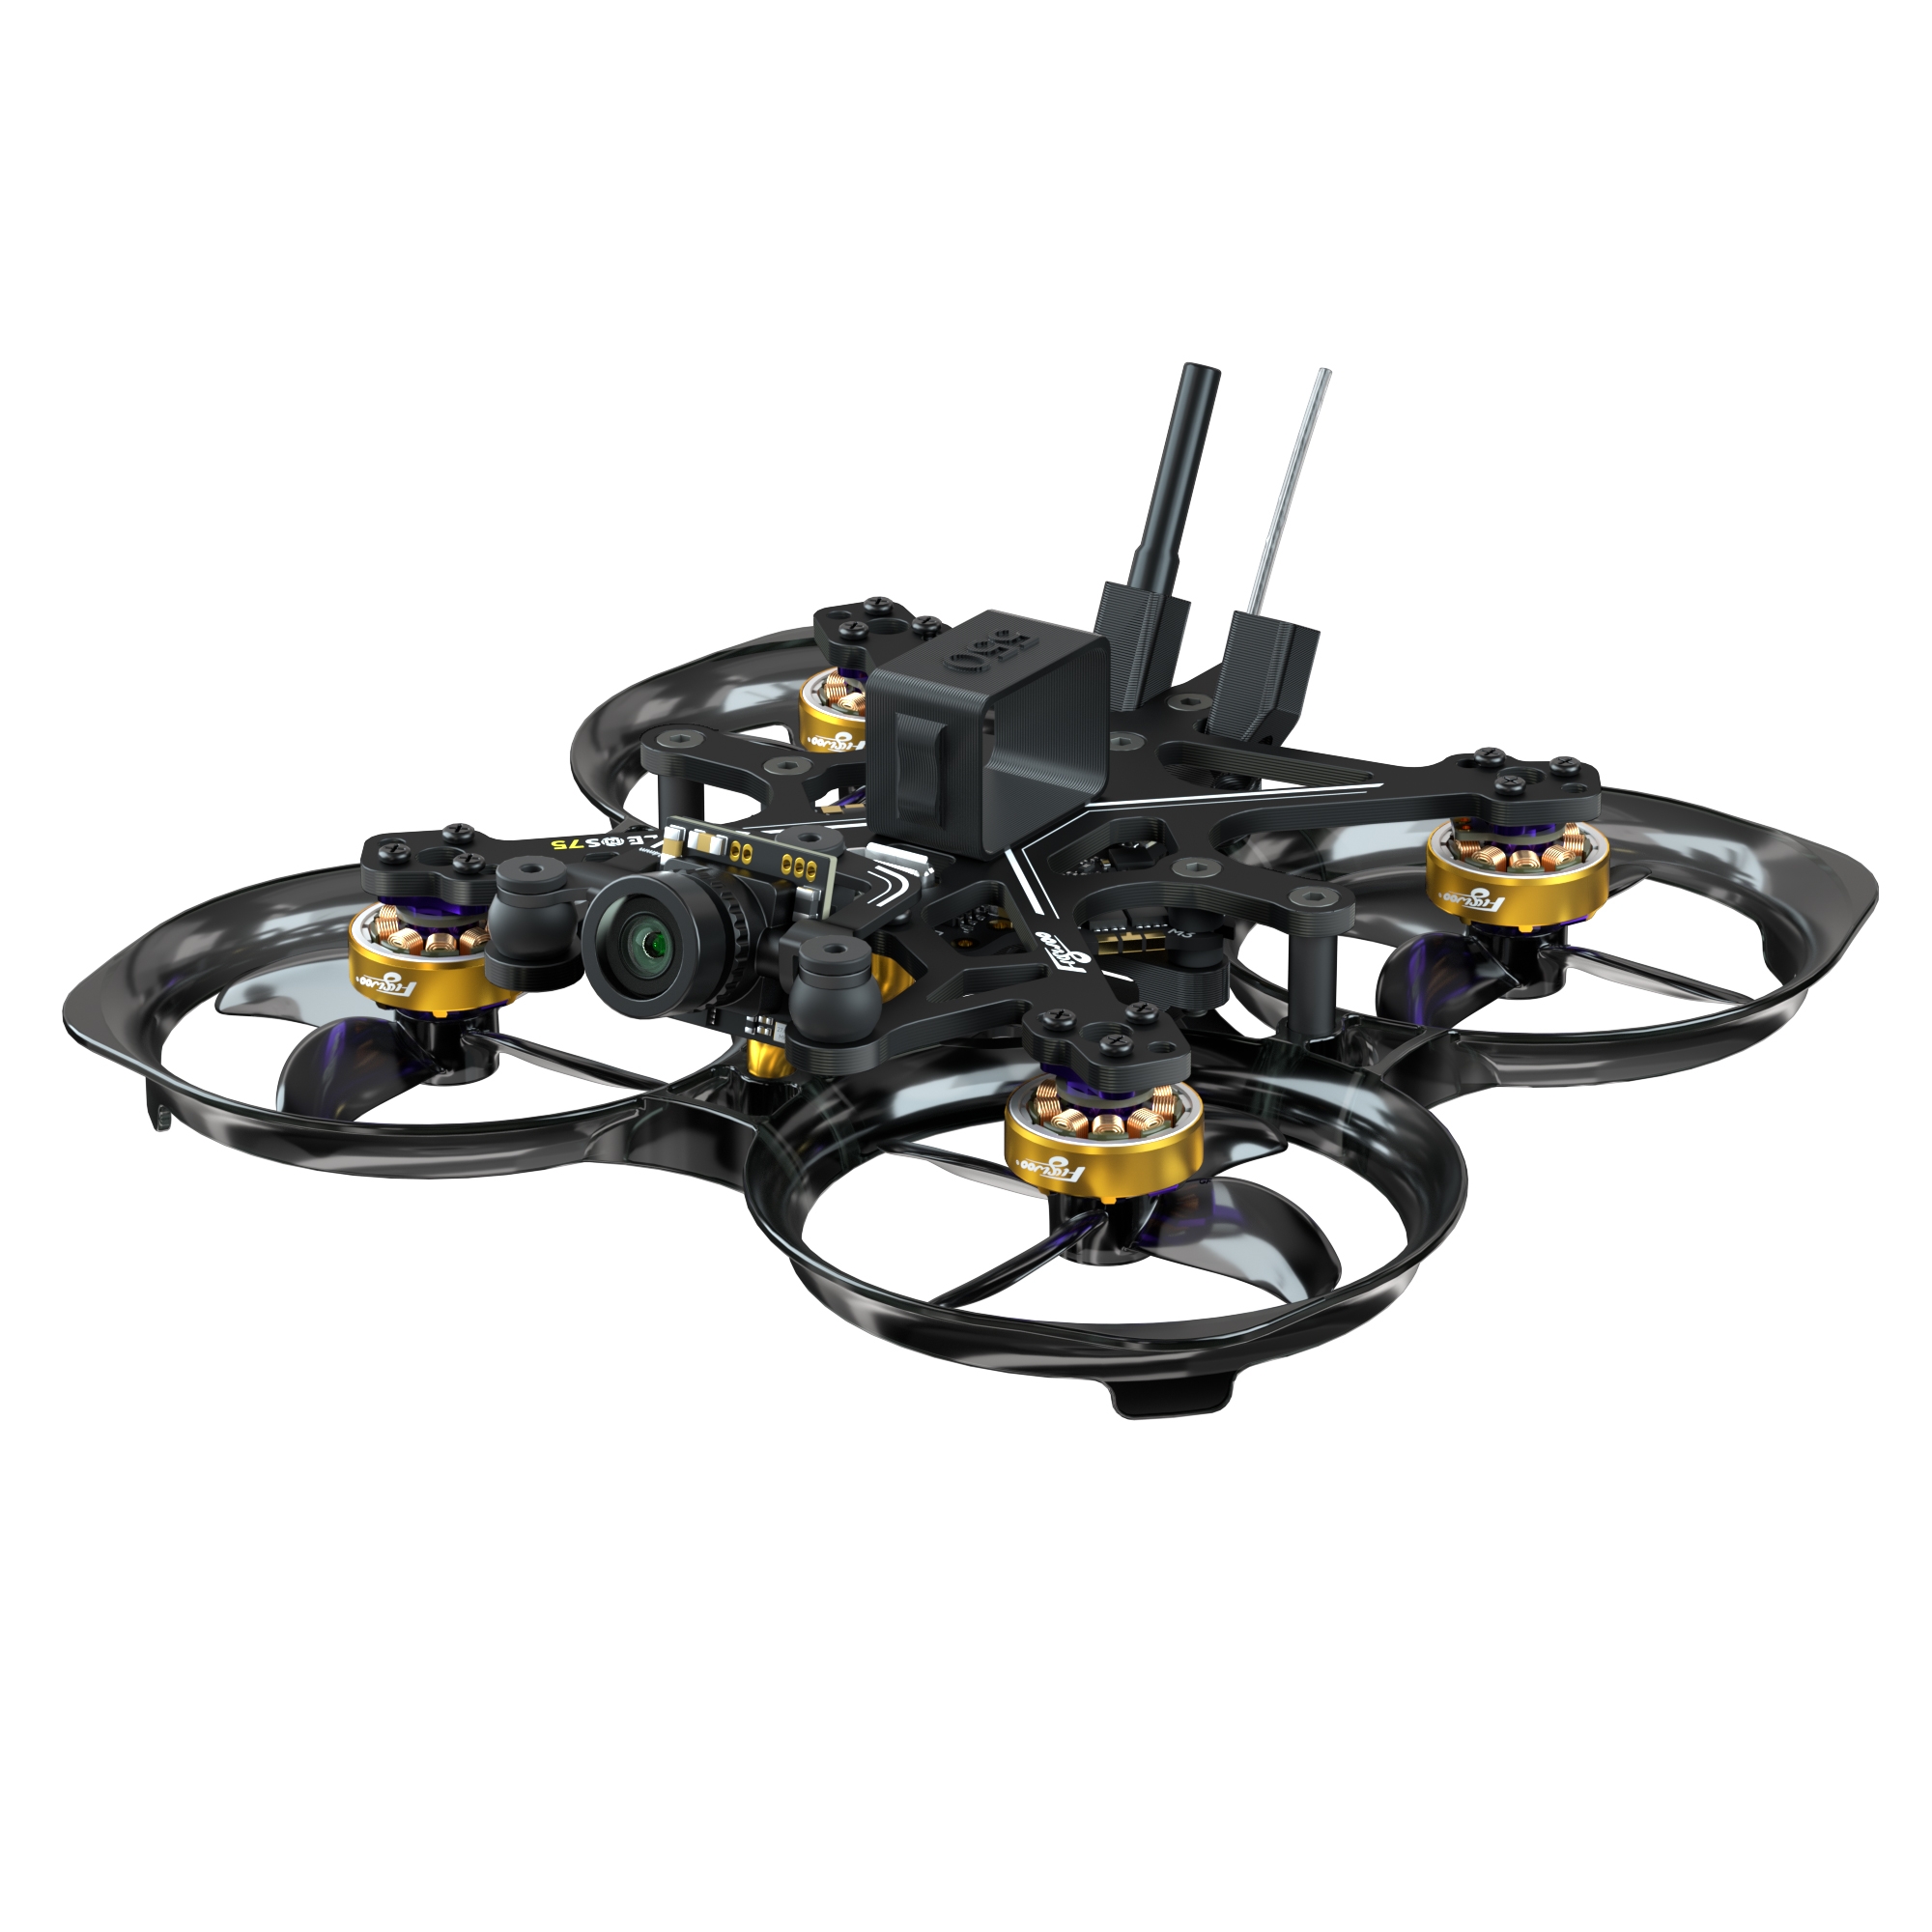 FlyLens 75 HD Analog 2S Brushless Whoop FPV Drone